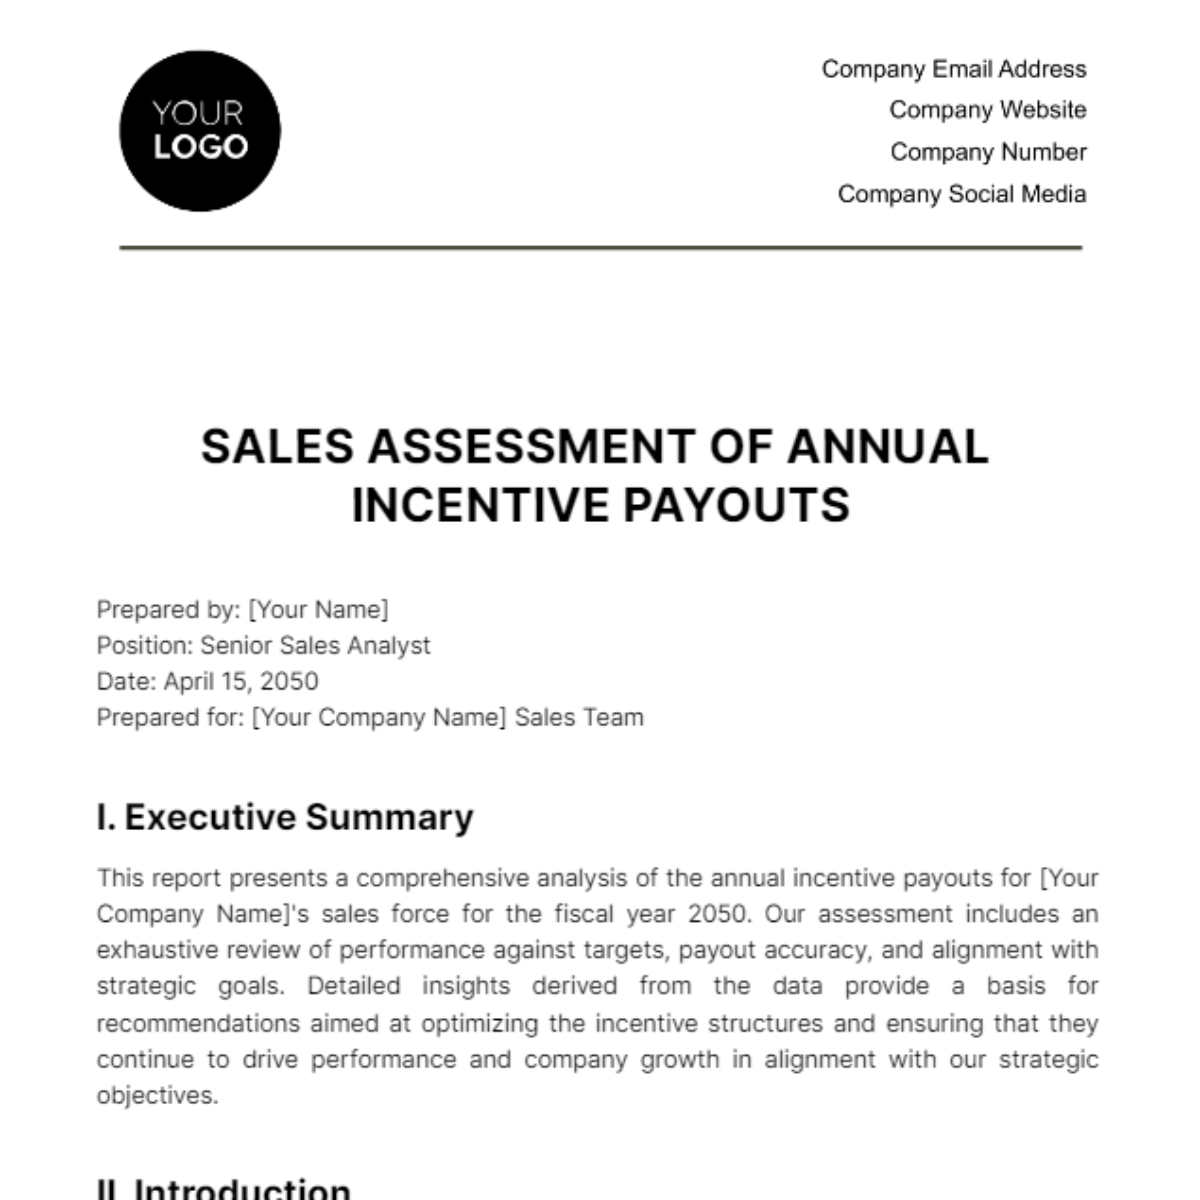 Sales Assessment of Annual Incentive Payouts Template